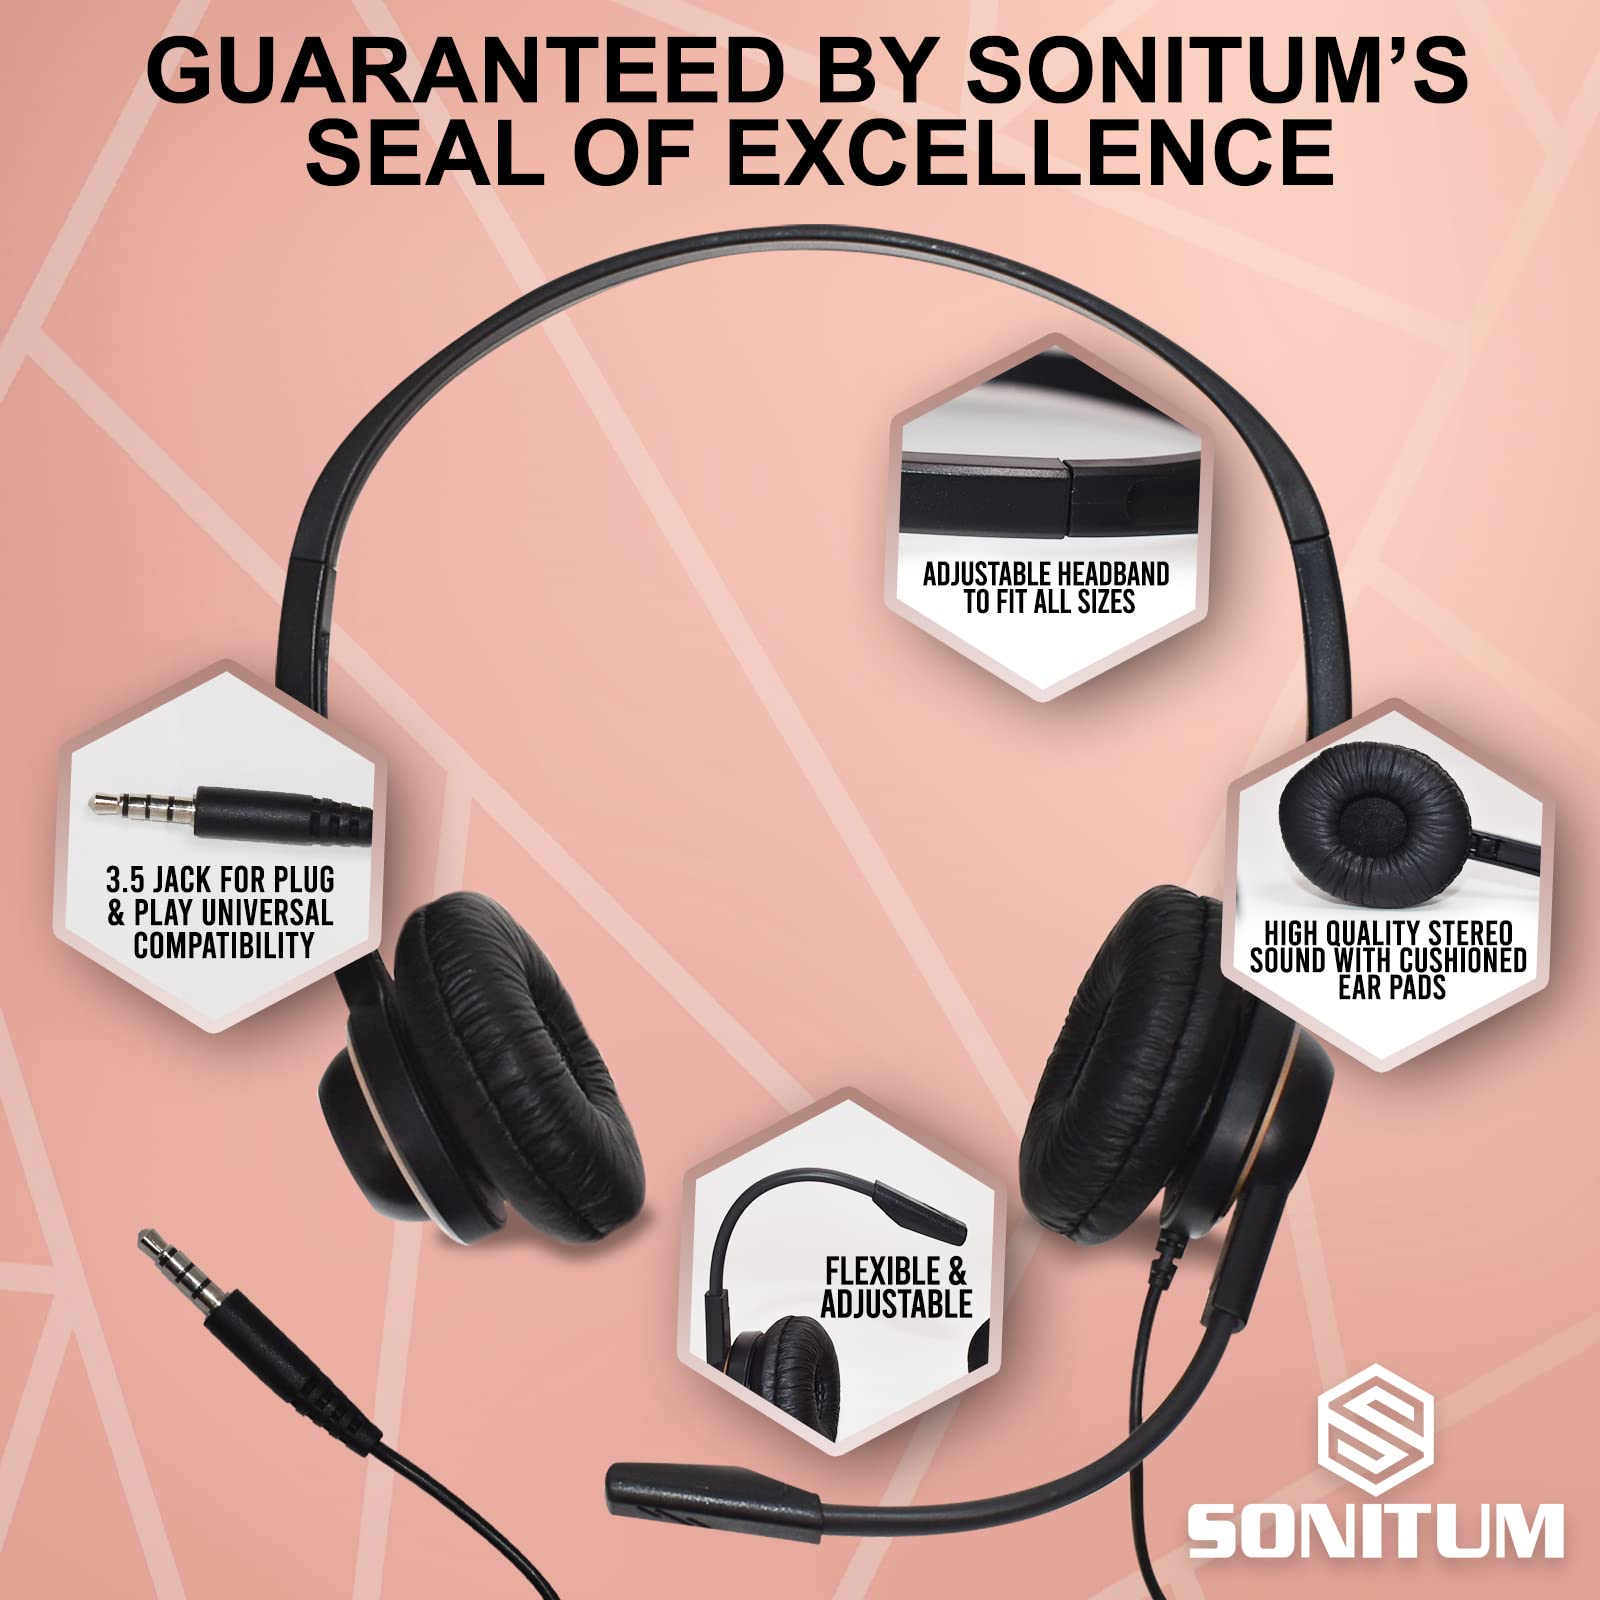 Sonitum Headset with Microphone Noise Canceling Computer Headset for Office, Meetings, Chat- Comfortable Over-Ear Headphones with Rotating Mic- 3.5 Jack for Universal Connectivity 1 Pack  - Like New